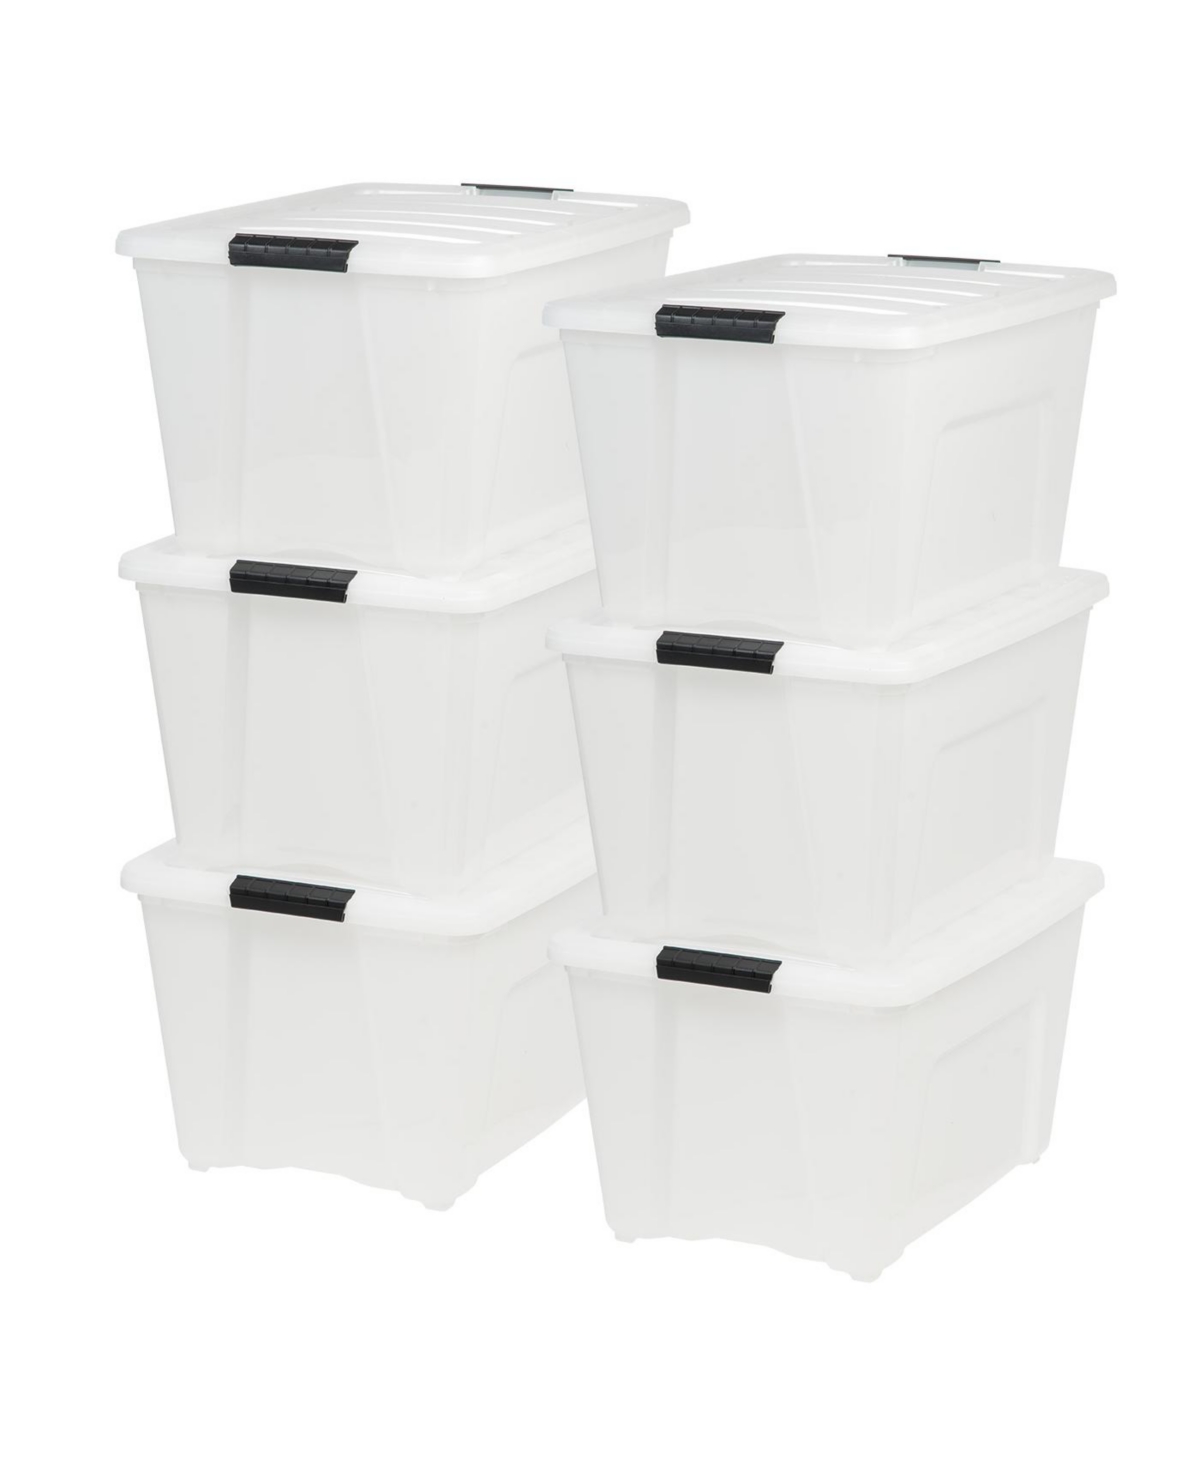 6 Pack 53 Quart Stackable Plastic Storage Bins with Lids and Latching Buckles, Pearl, Containers with Lids and Latches, Durable Nestable